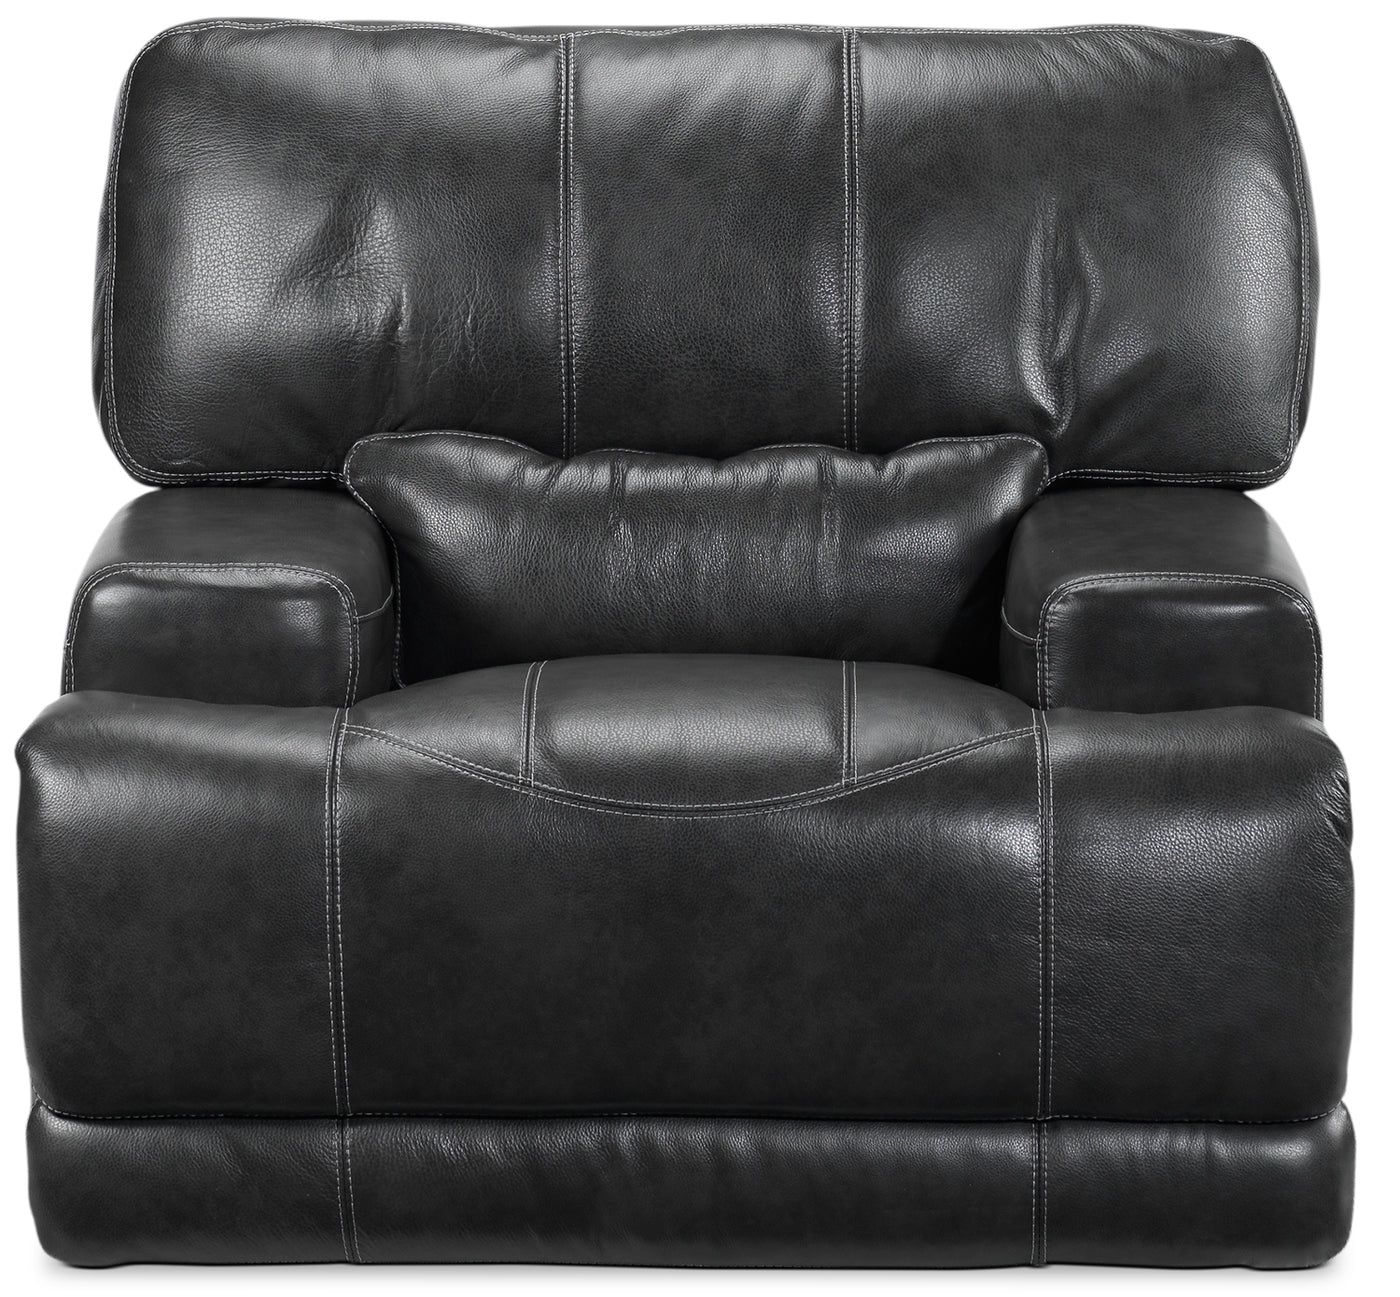 Dearborn Leather Power Recliner - Charcoal